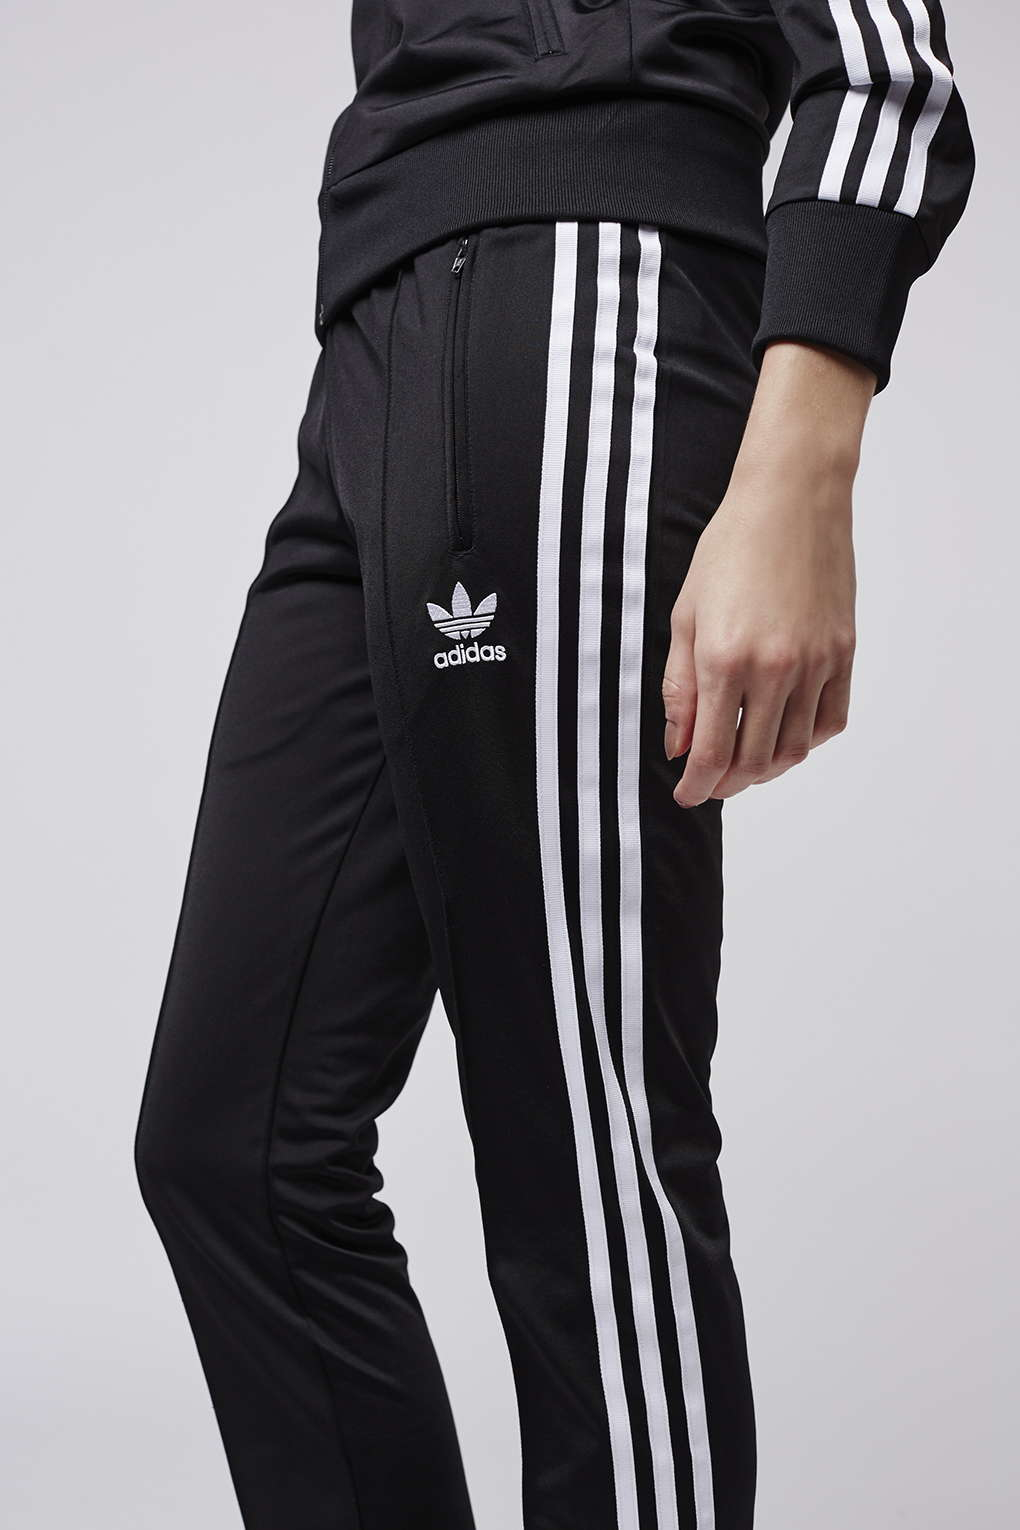 Lyst - Topshop Firebird Track Pant Trousers By Adidas Originals in Black